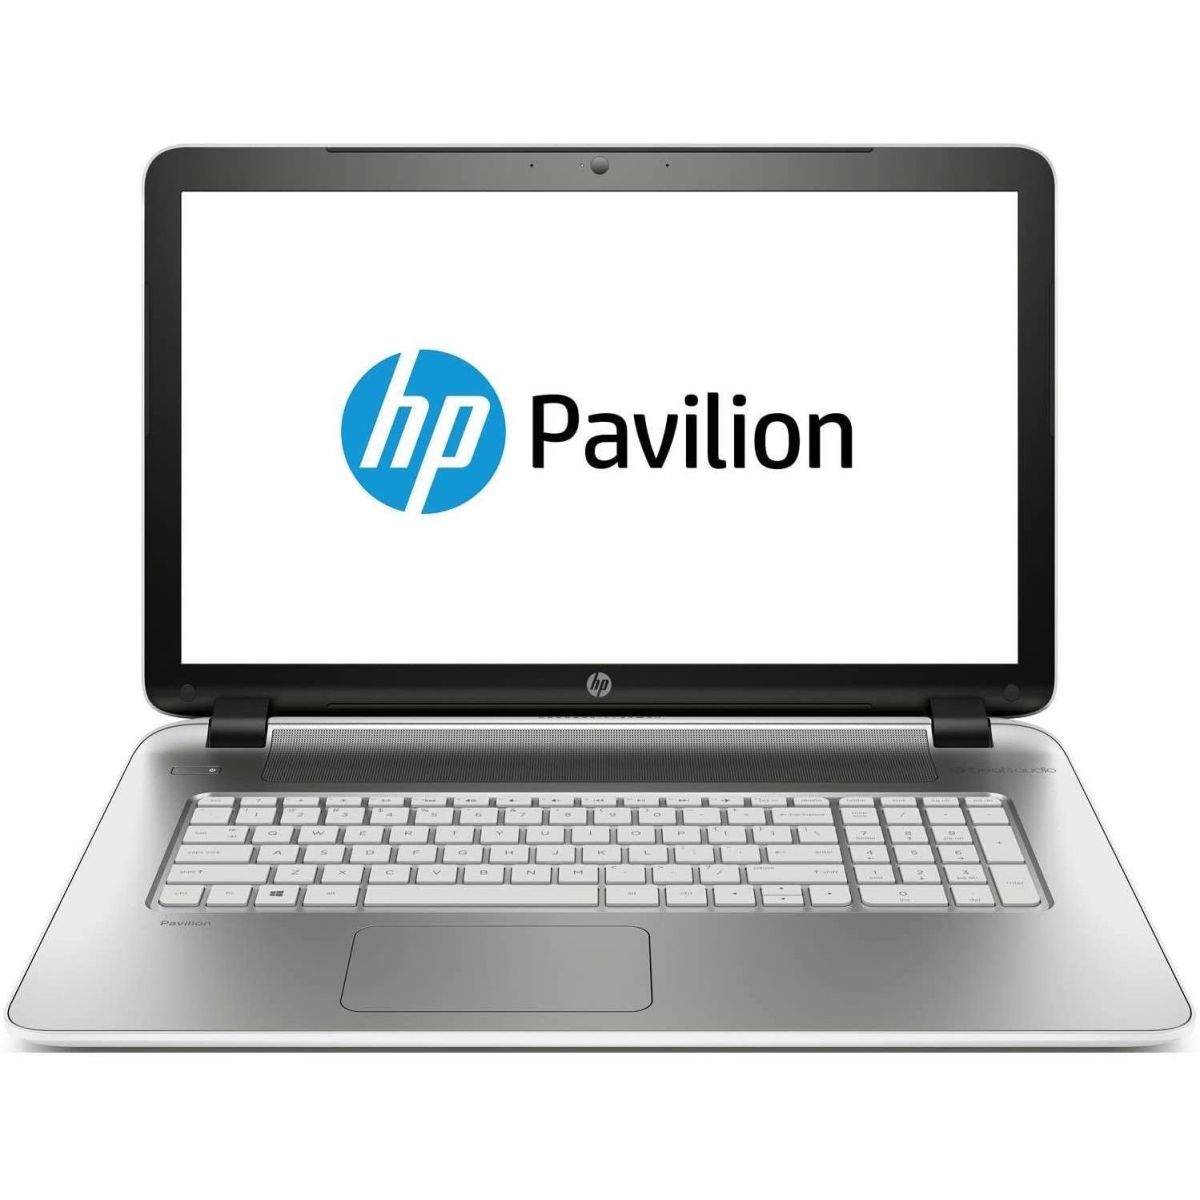 HP Pavilion 17-f211nf AMD E1-6010 4 Go HDD 1 To